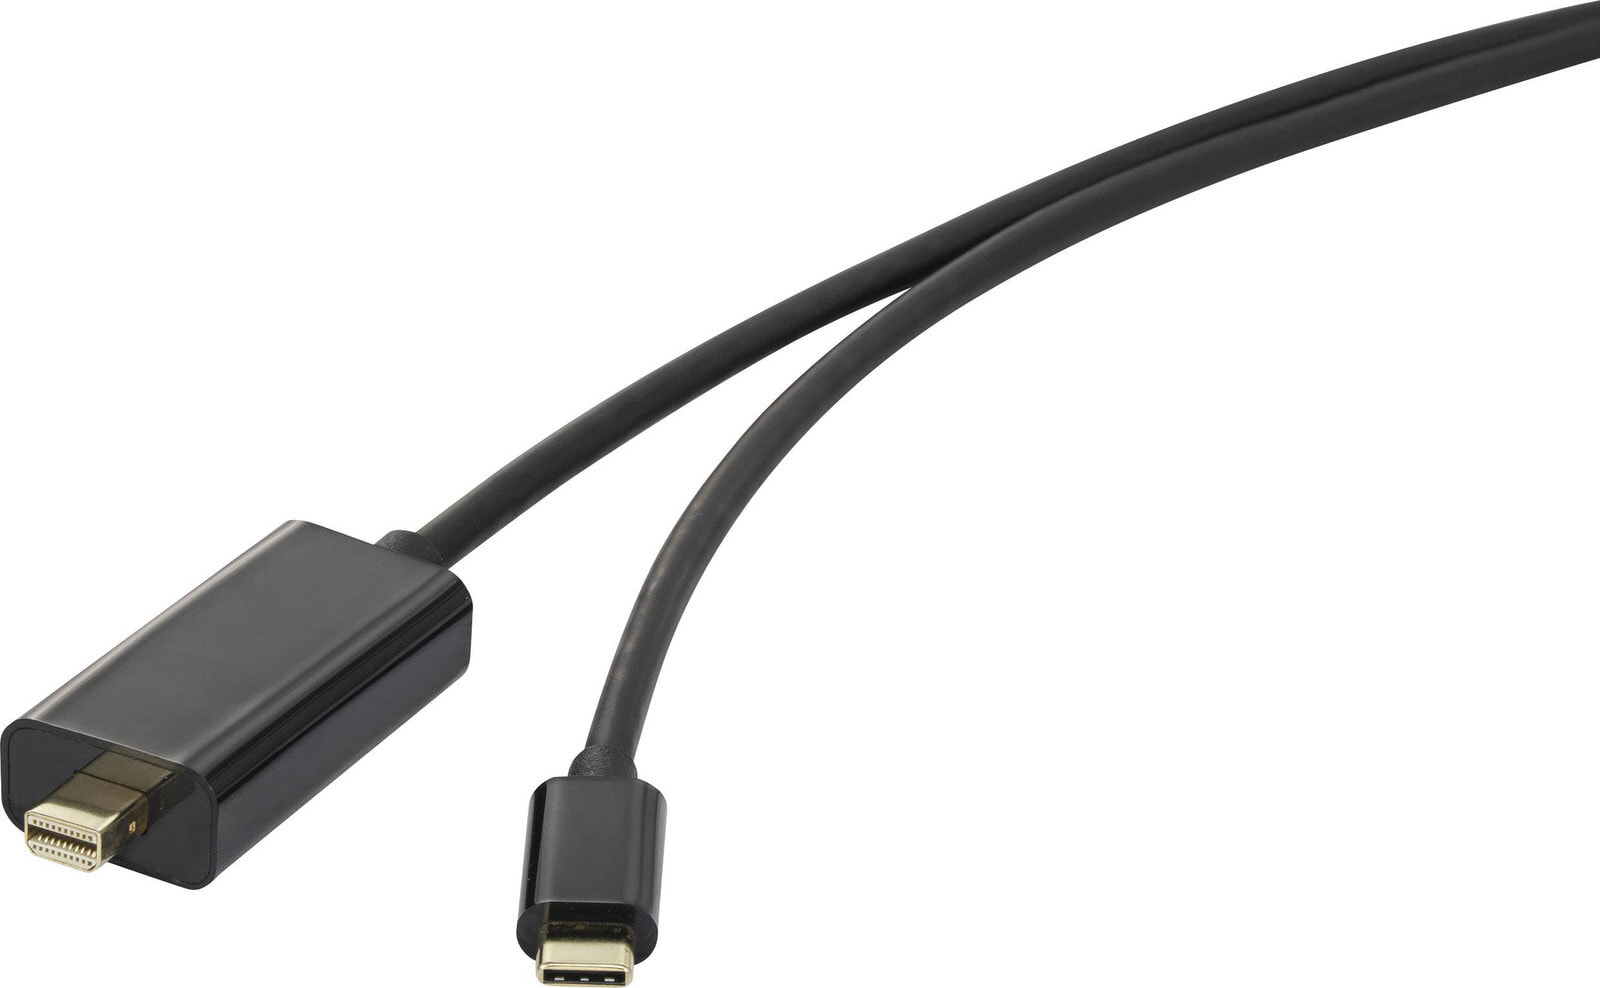 RF-3421684. Cable length: 5 m, Connector 1: USB Type-C, Connector 2: Mini DisplayPort